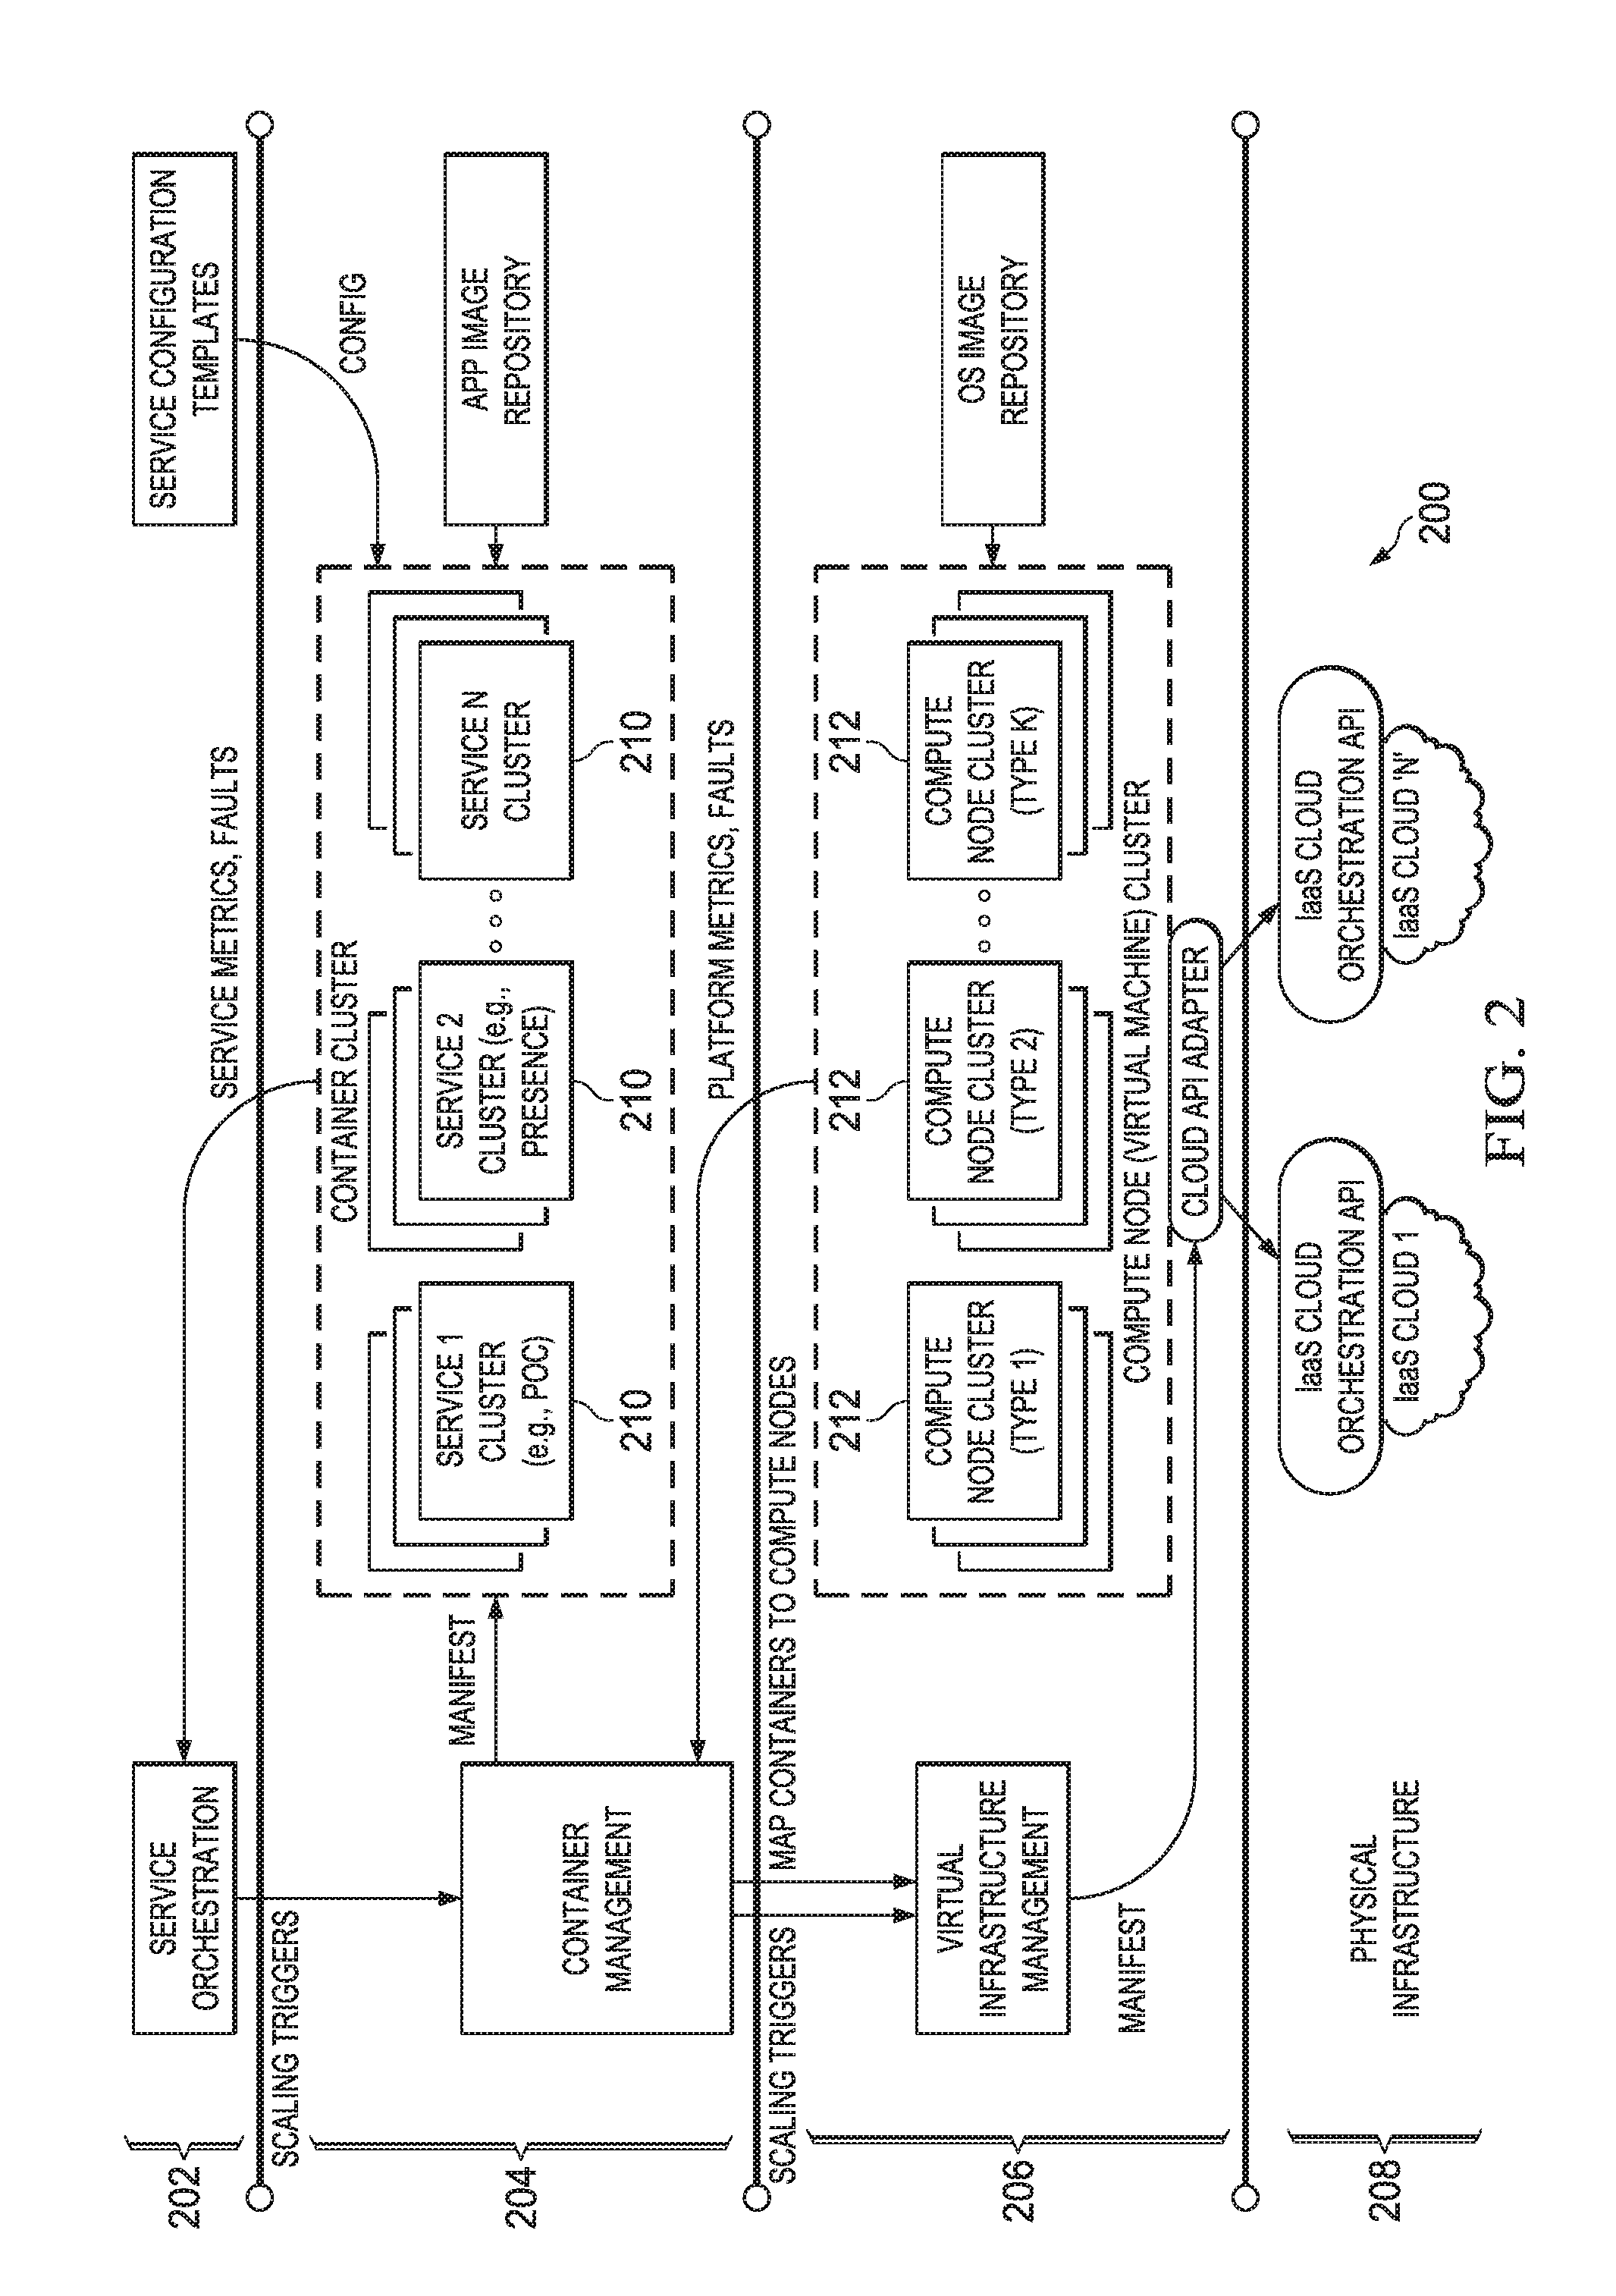 System and Method for Elastic Scaling using a Container-Based Platform